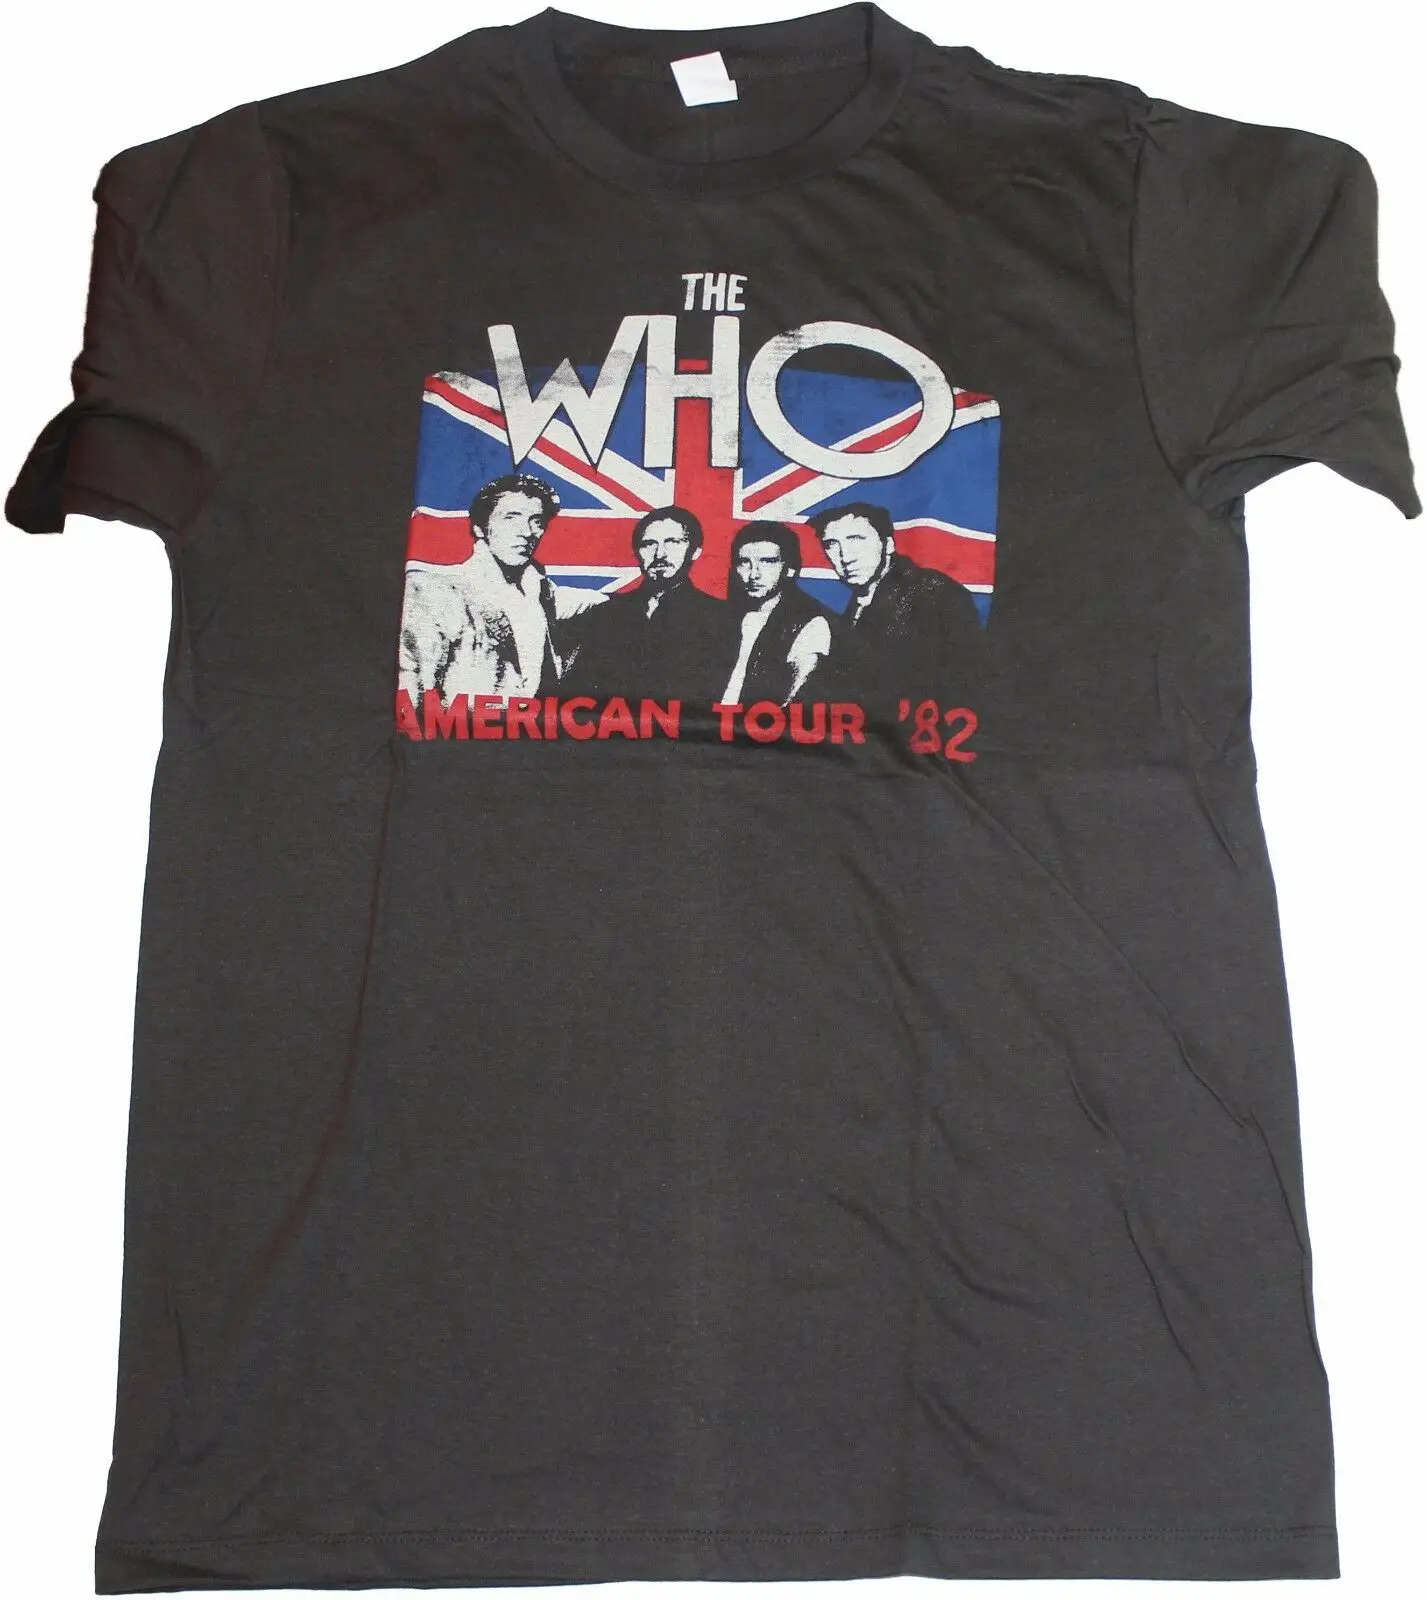 

THE WHO TOUR VINTAGE T-shirt Music Hard Classic Rock Metal Death Thrash Heavy Funny Tops Tee Casual O Neck